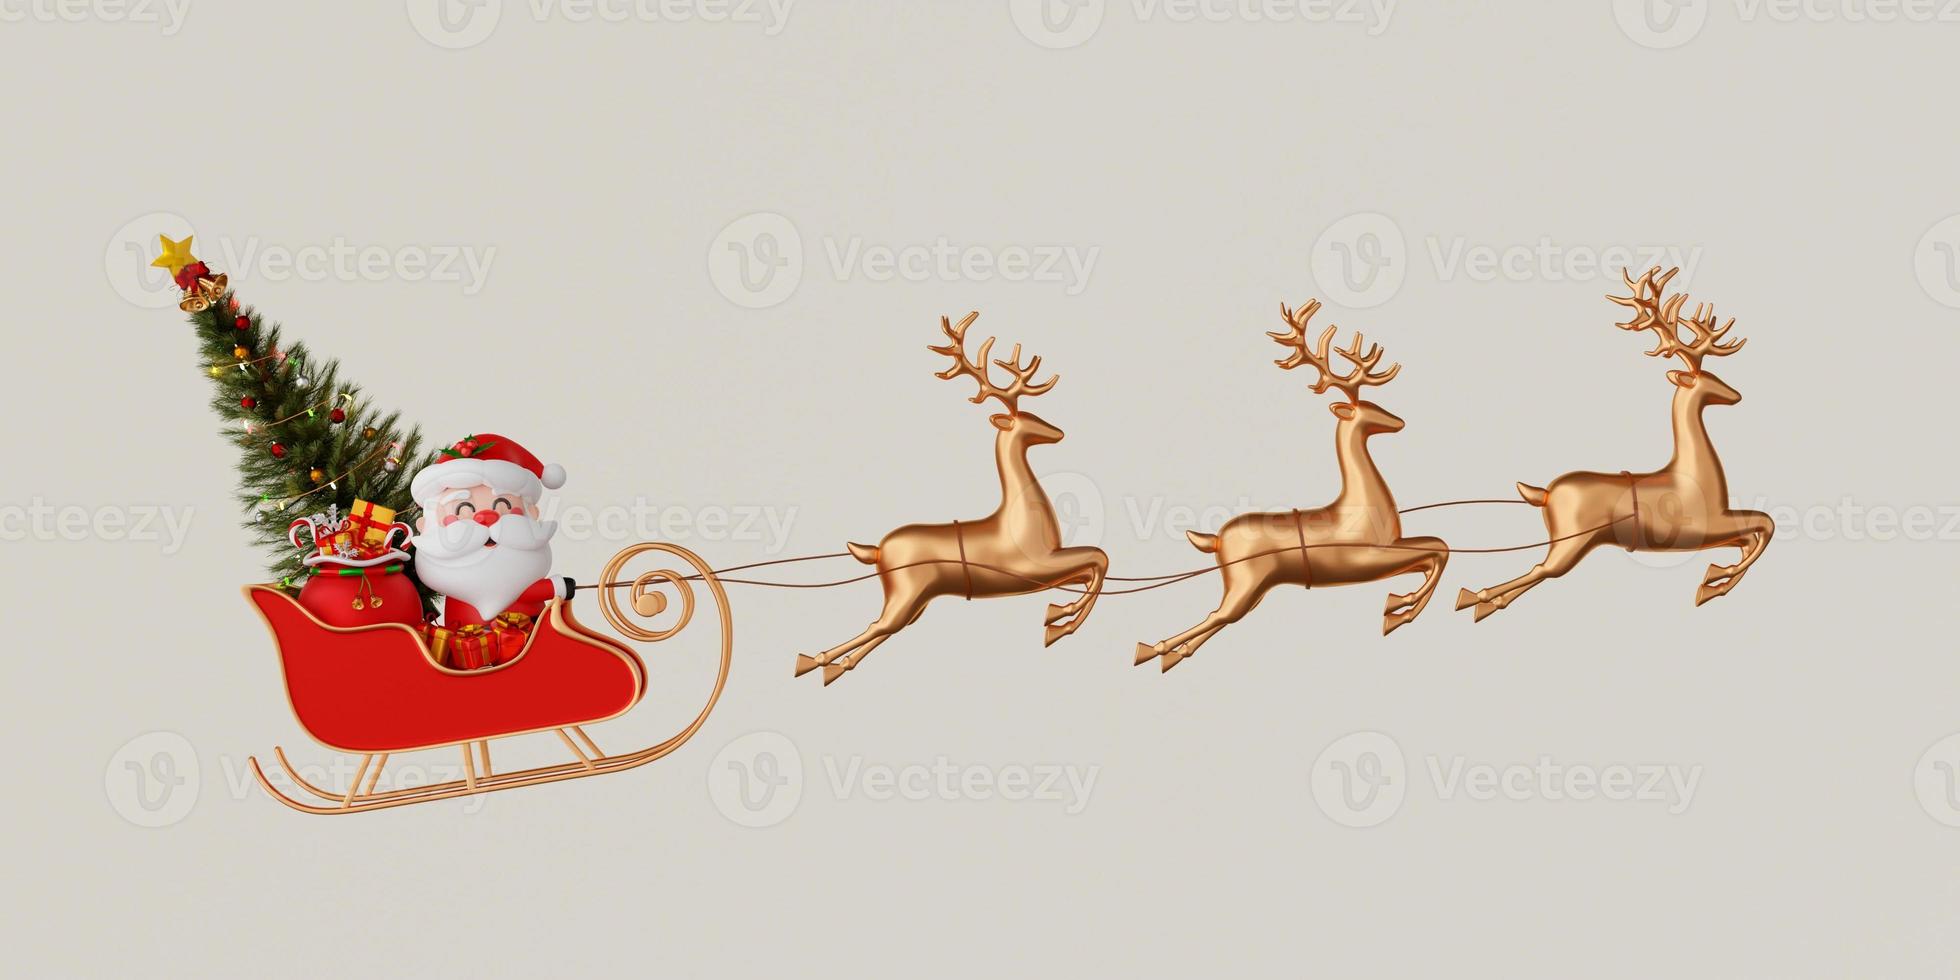 3d illustration of Santa Claus riding on sleigh with gift bag photo